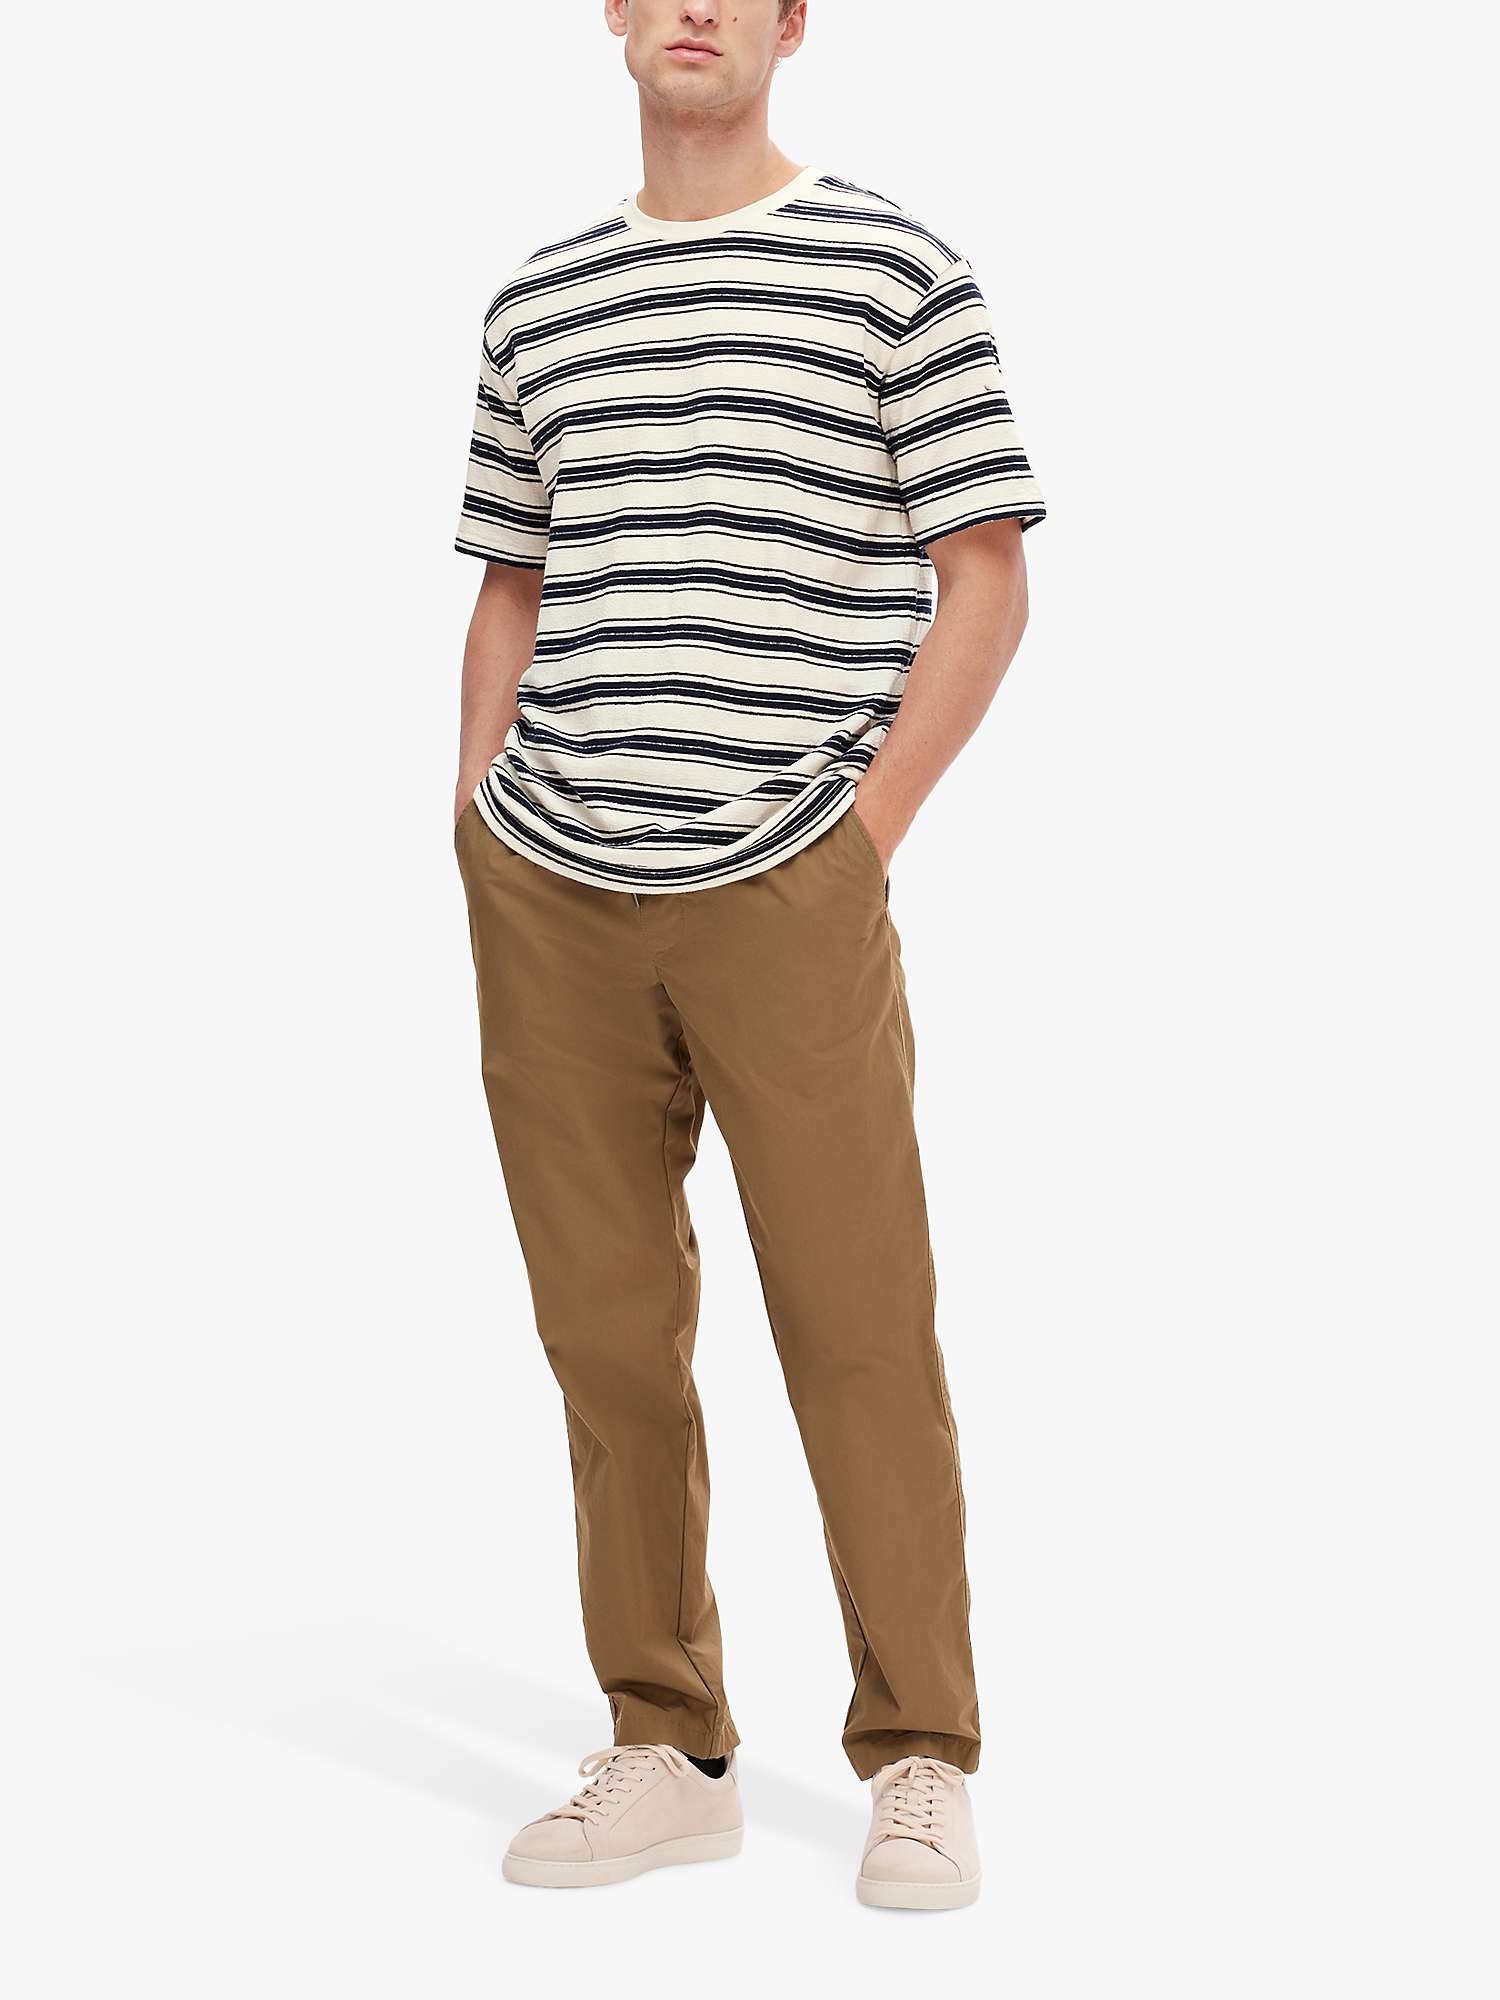 Buy SELECTED HOMME Relaxed Crew T-Shirt, Blue/White Online at johnlewis.com